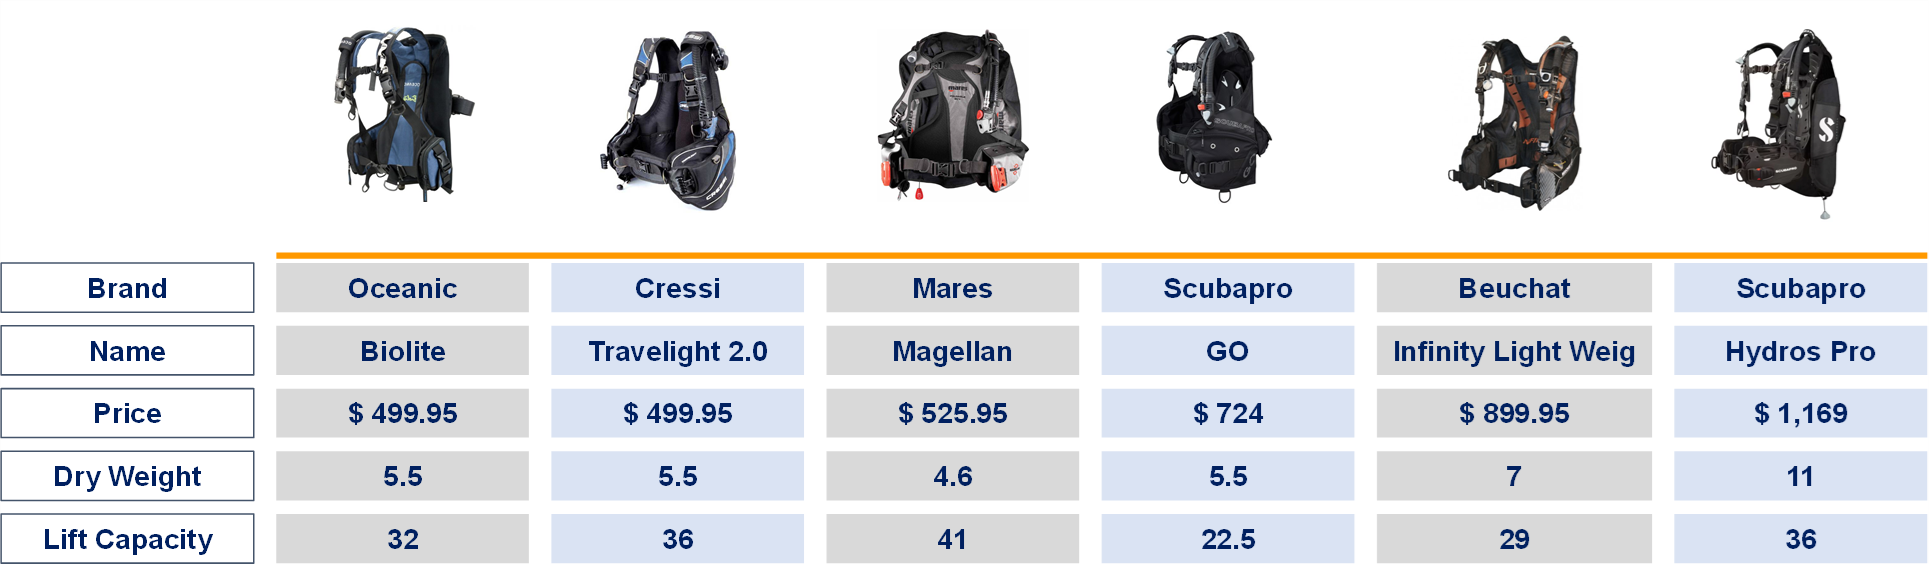 Travel BCDs ranked by price